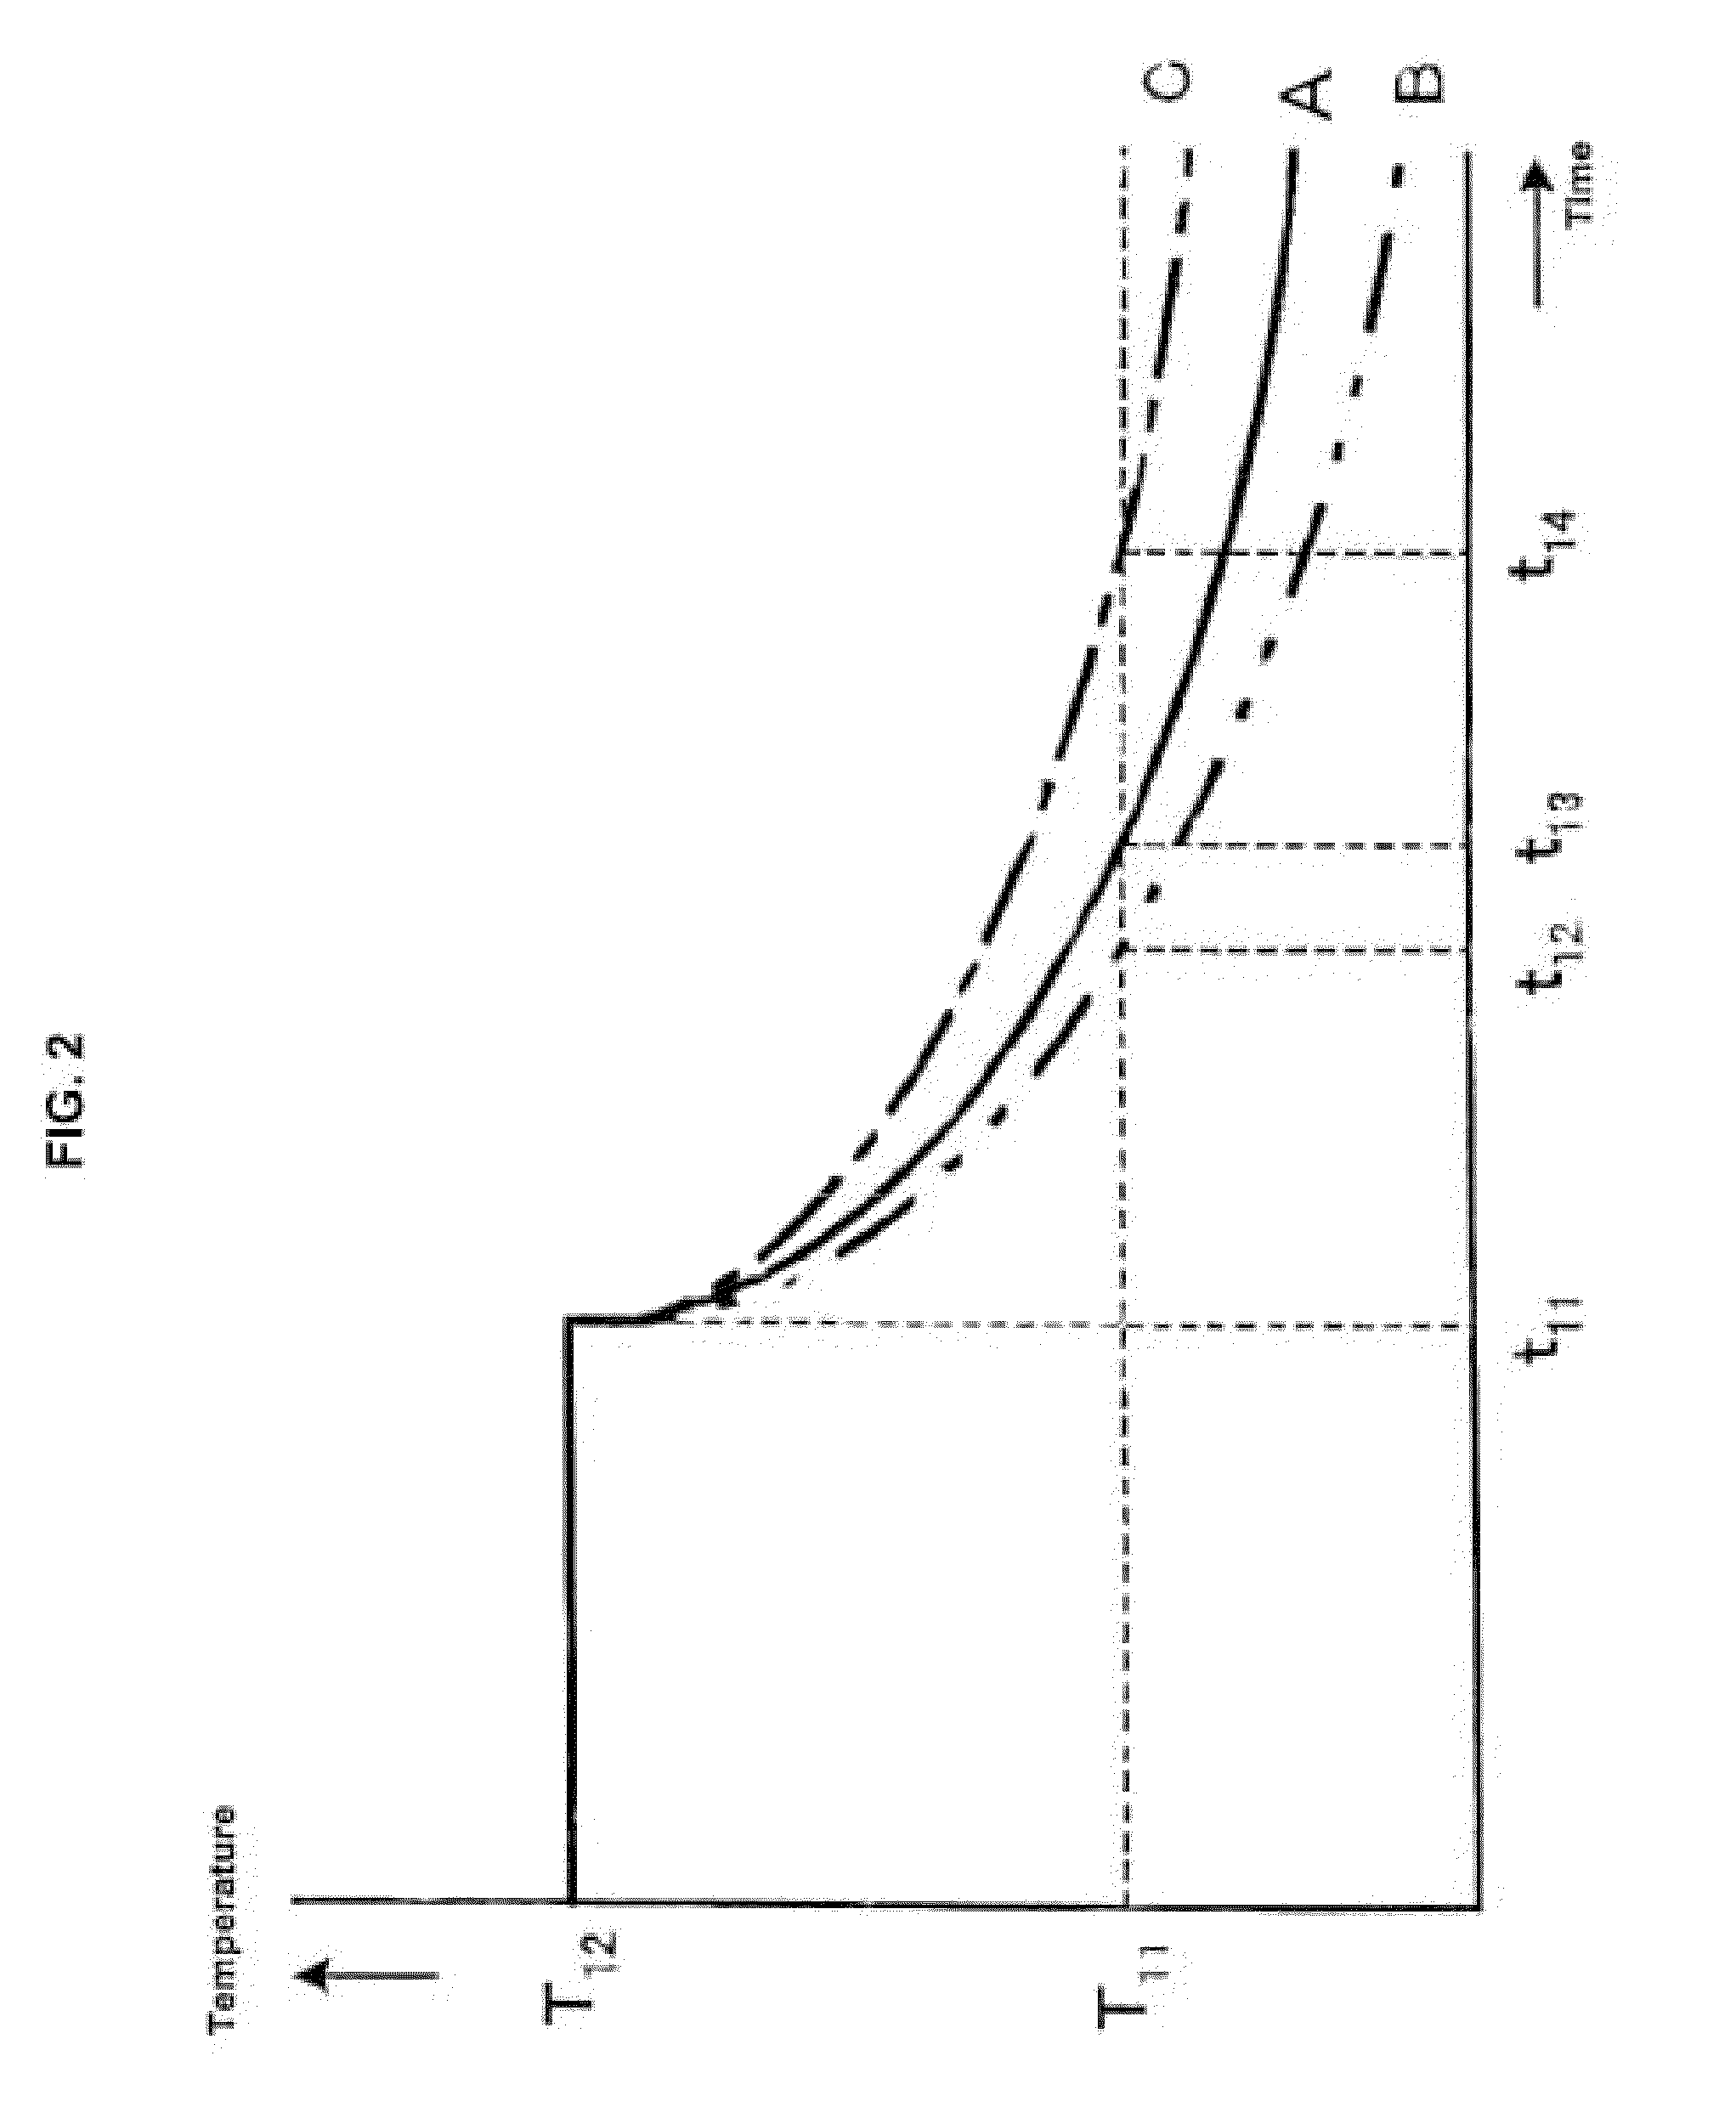 Cooling capacity measurement method for inverter device